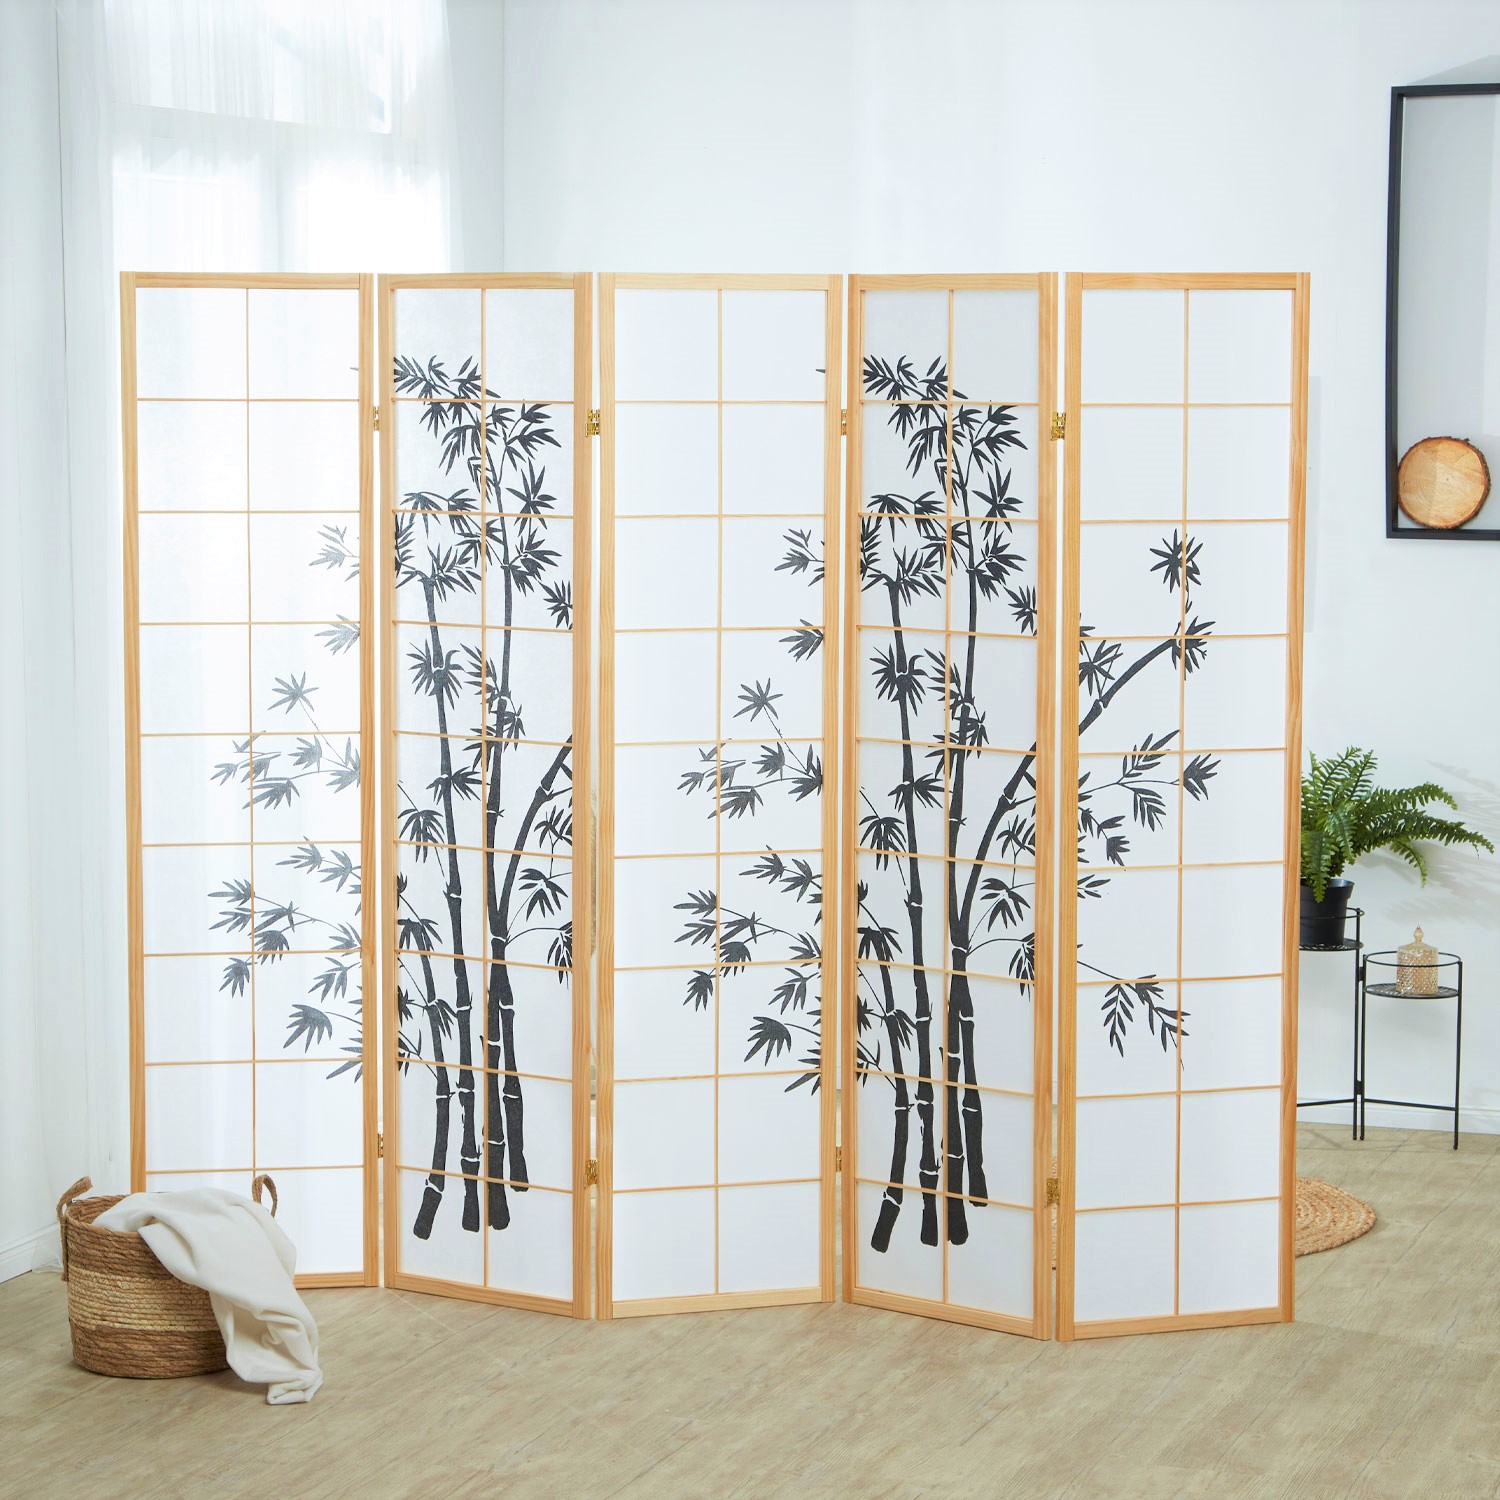 Paravent room divider 3 parts, natural wood, white rice paper, bamboo pattern, height 179 cm